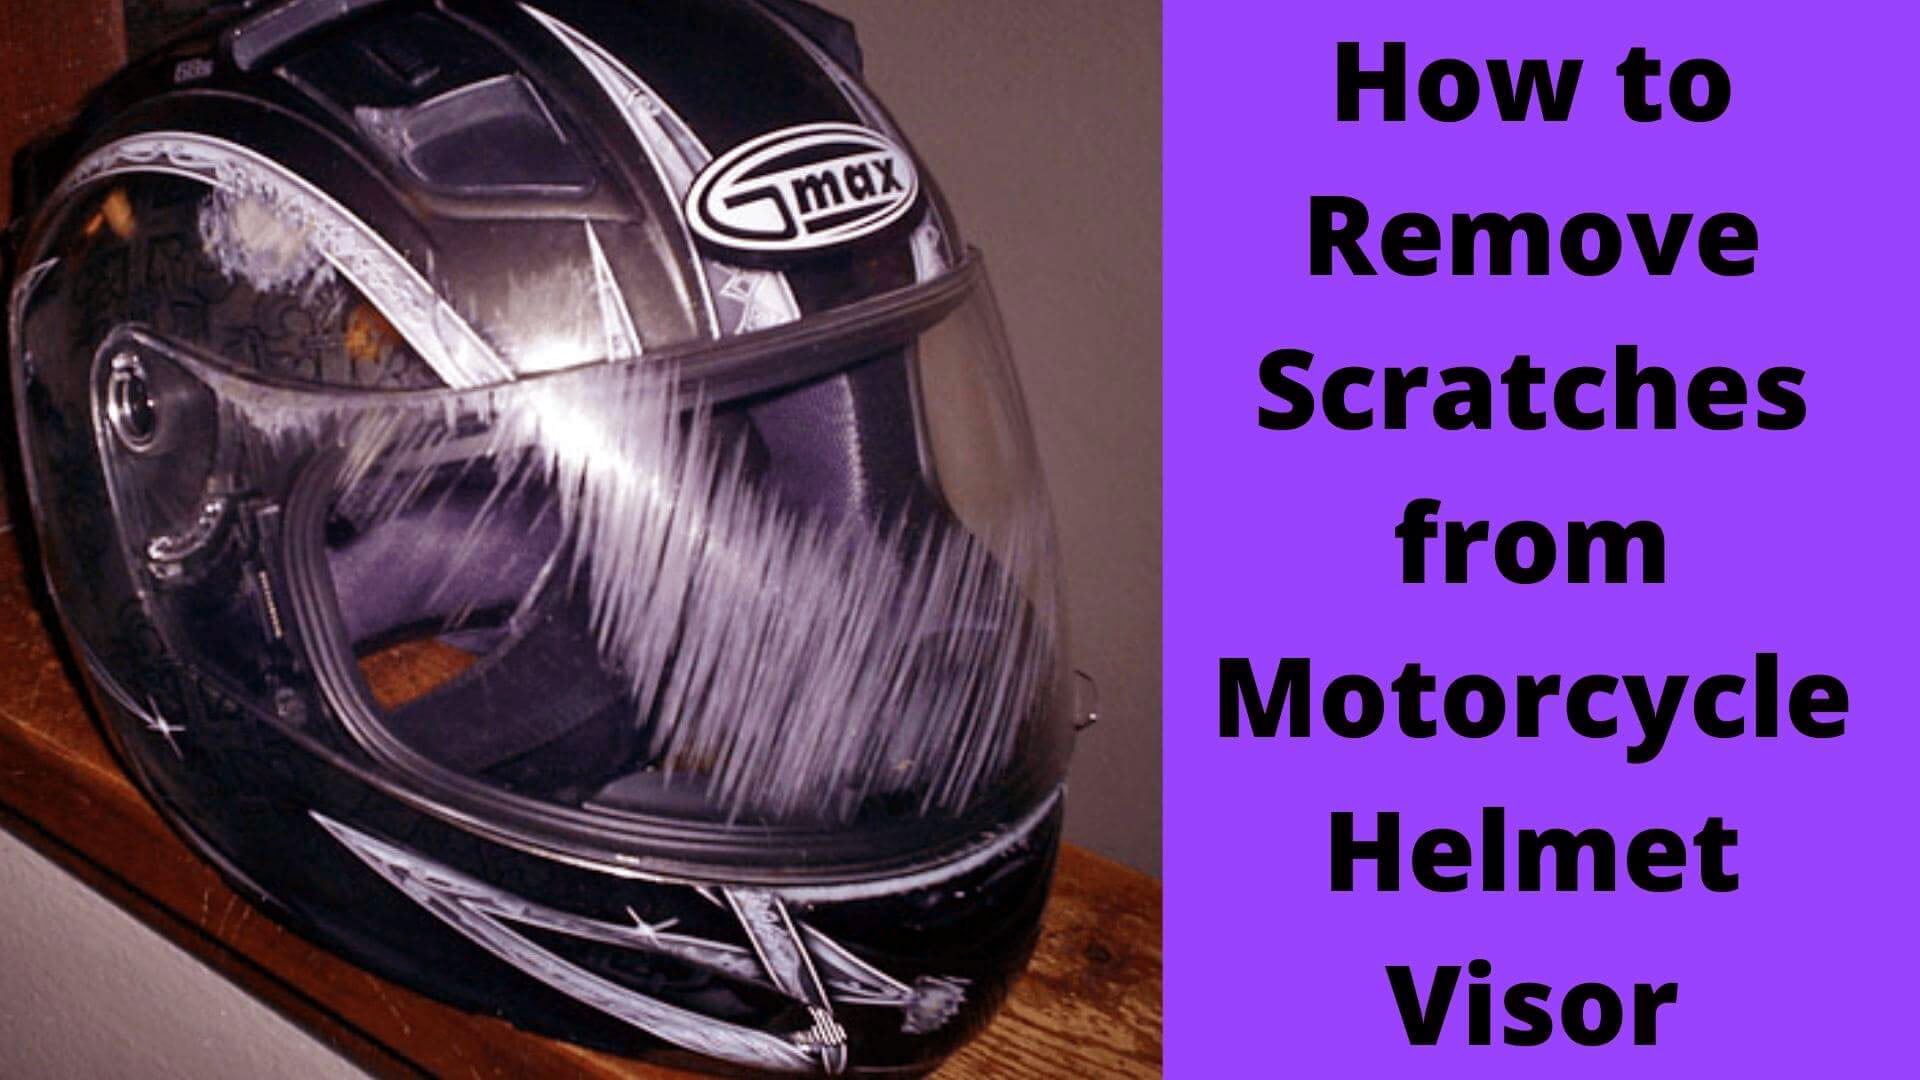 How to Remove Scratches From Motorcycle Helmet Visor?